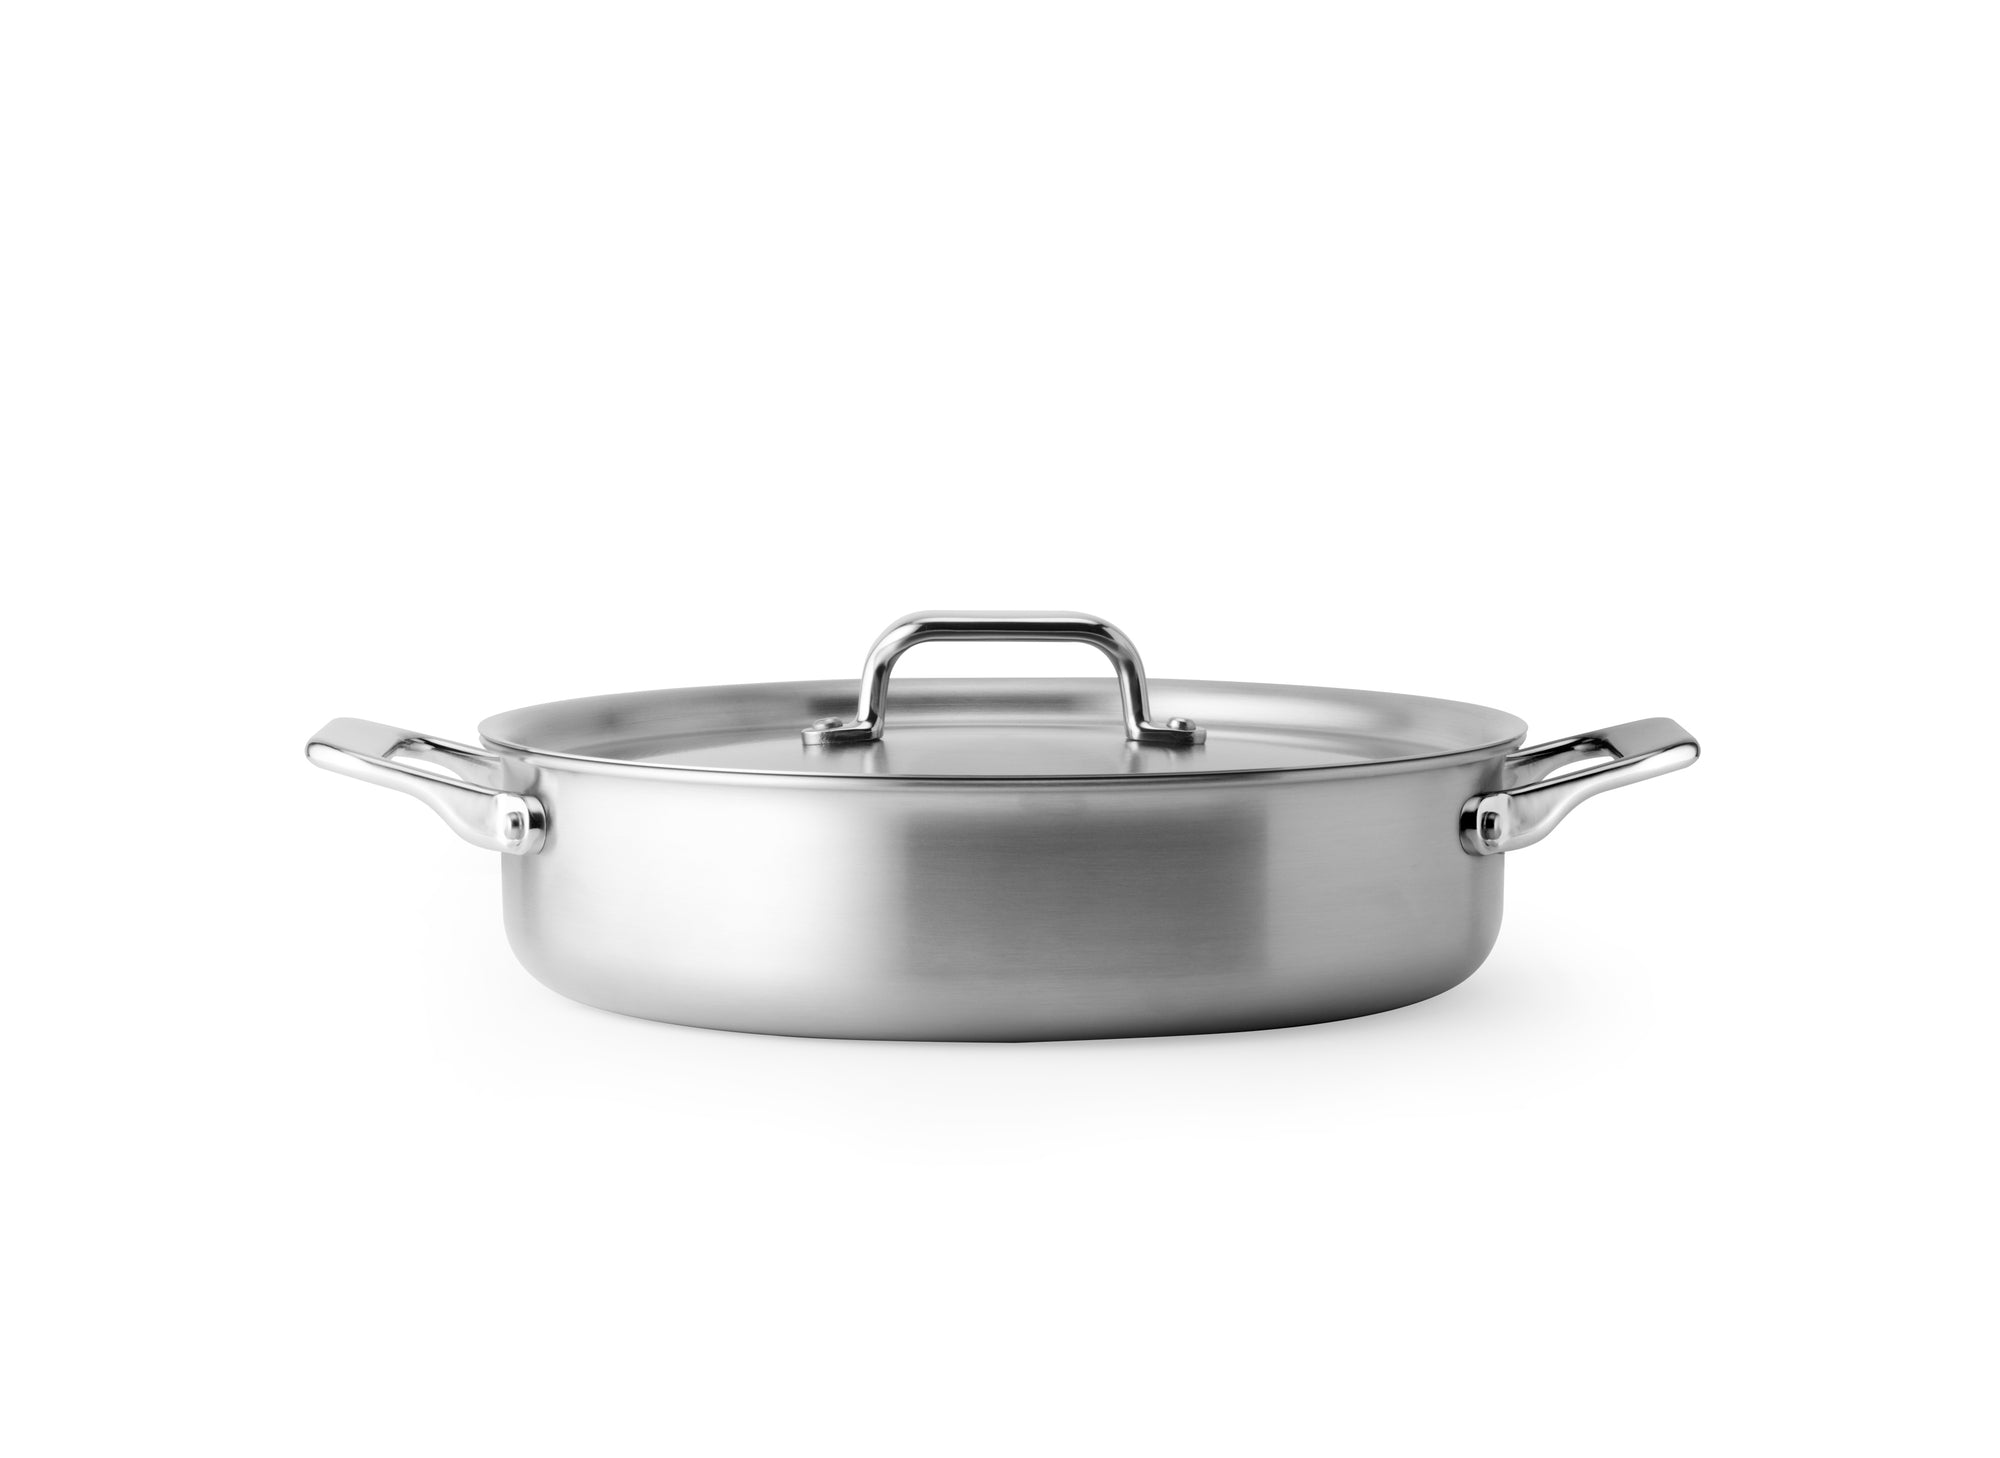 The Misen 6 QT Rondeau pan comes with a stainless steel lid.